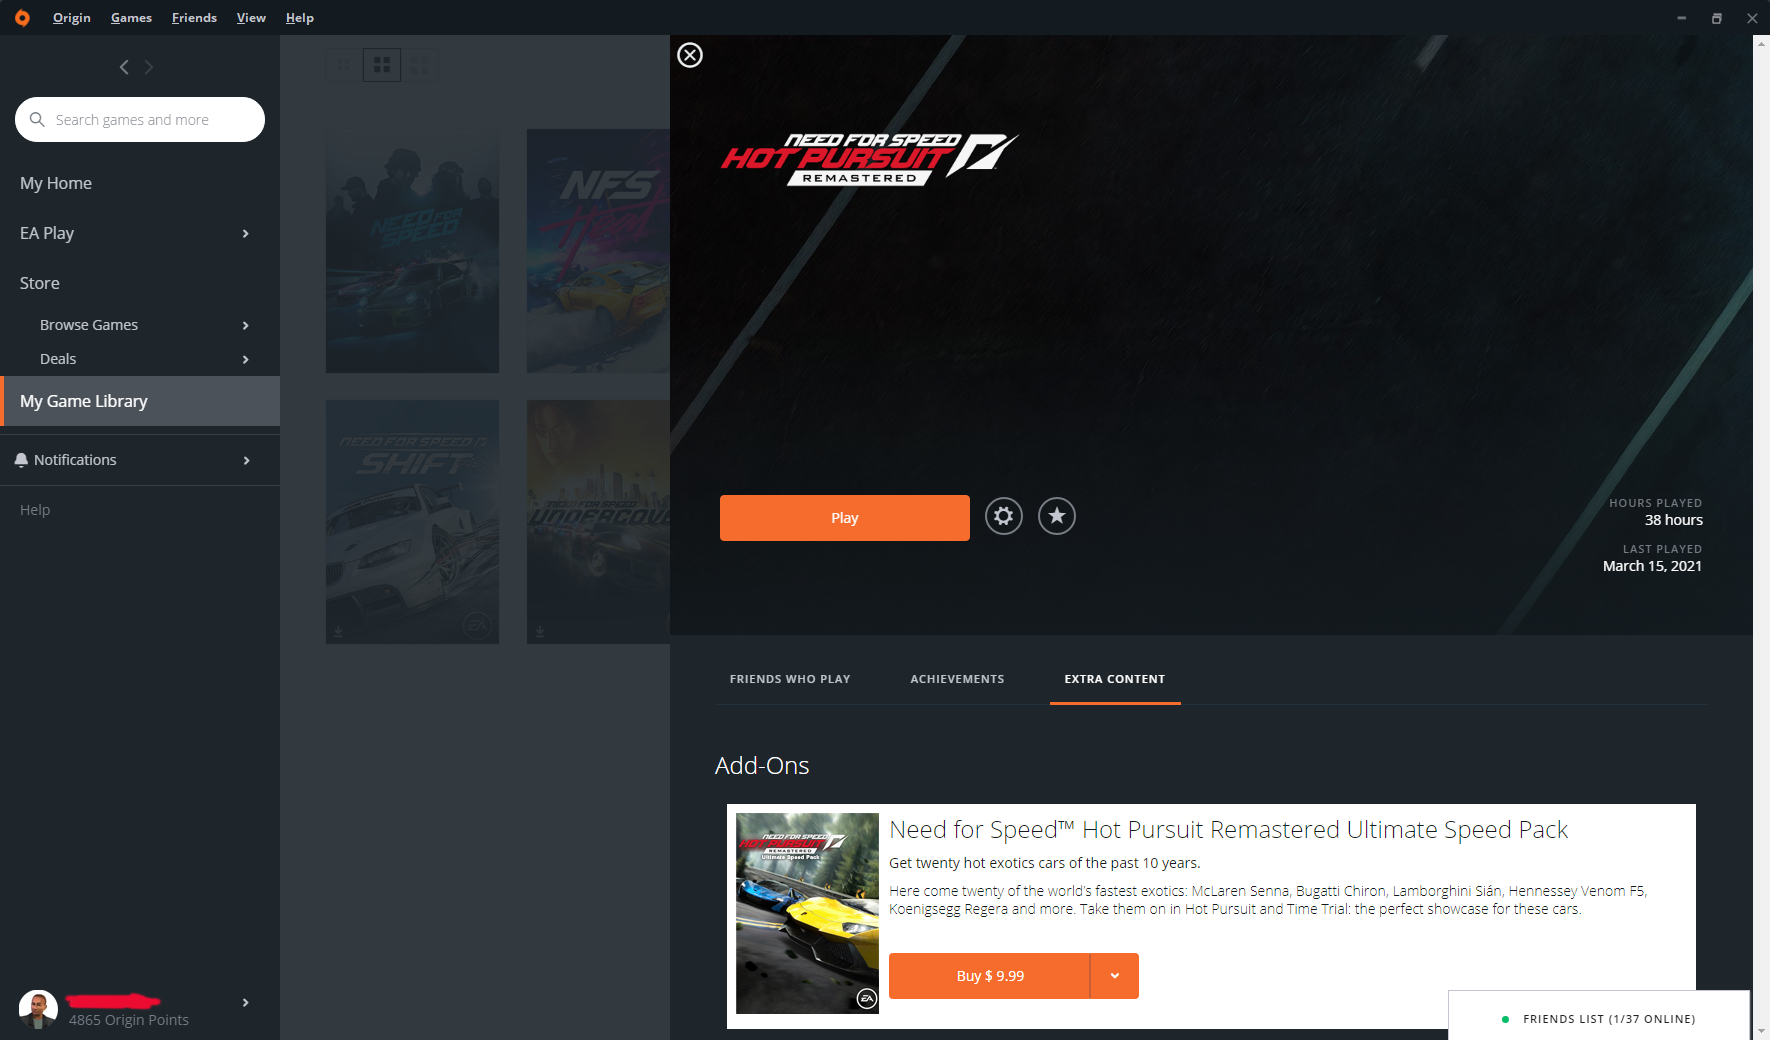 Need for Speed Hot Pursuit Remstered - DLC Ultimate Speed Pack